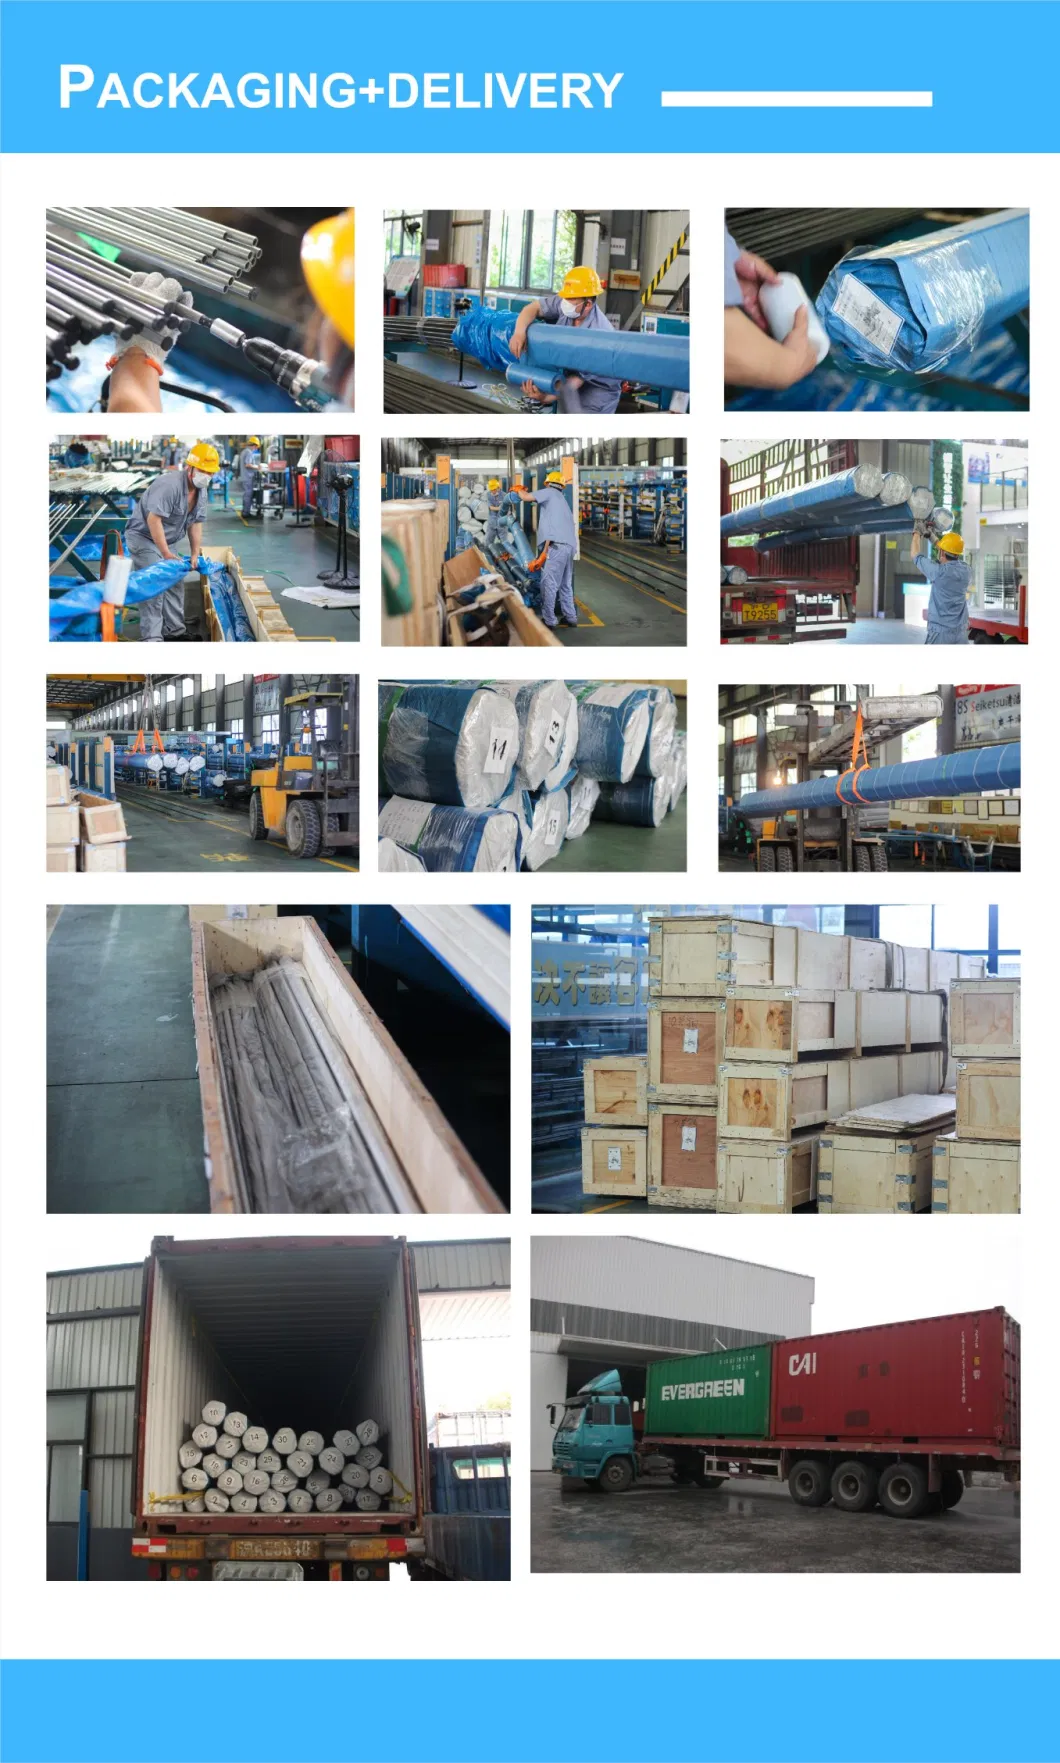 API OCTG Pipe Bimetallic Clad Steel Pipe for Transporting Crude Oil and Crude Gas